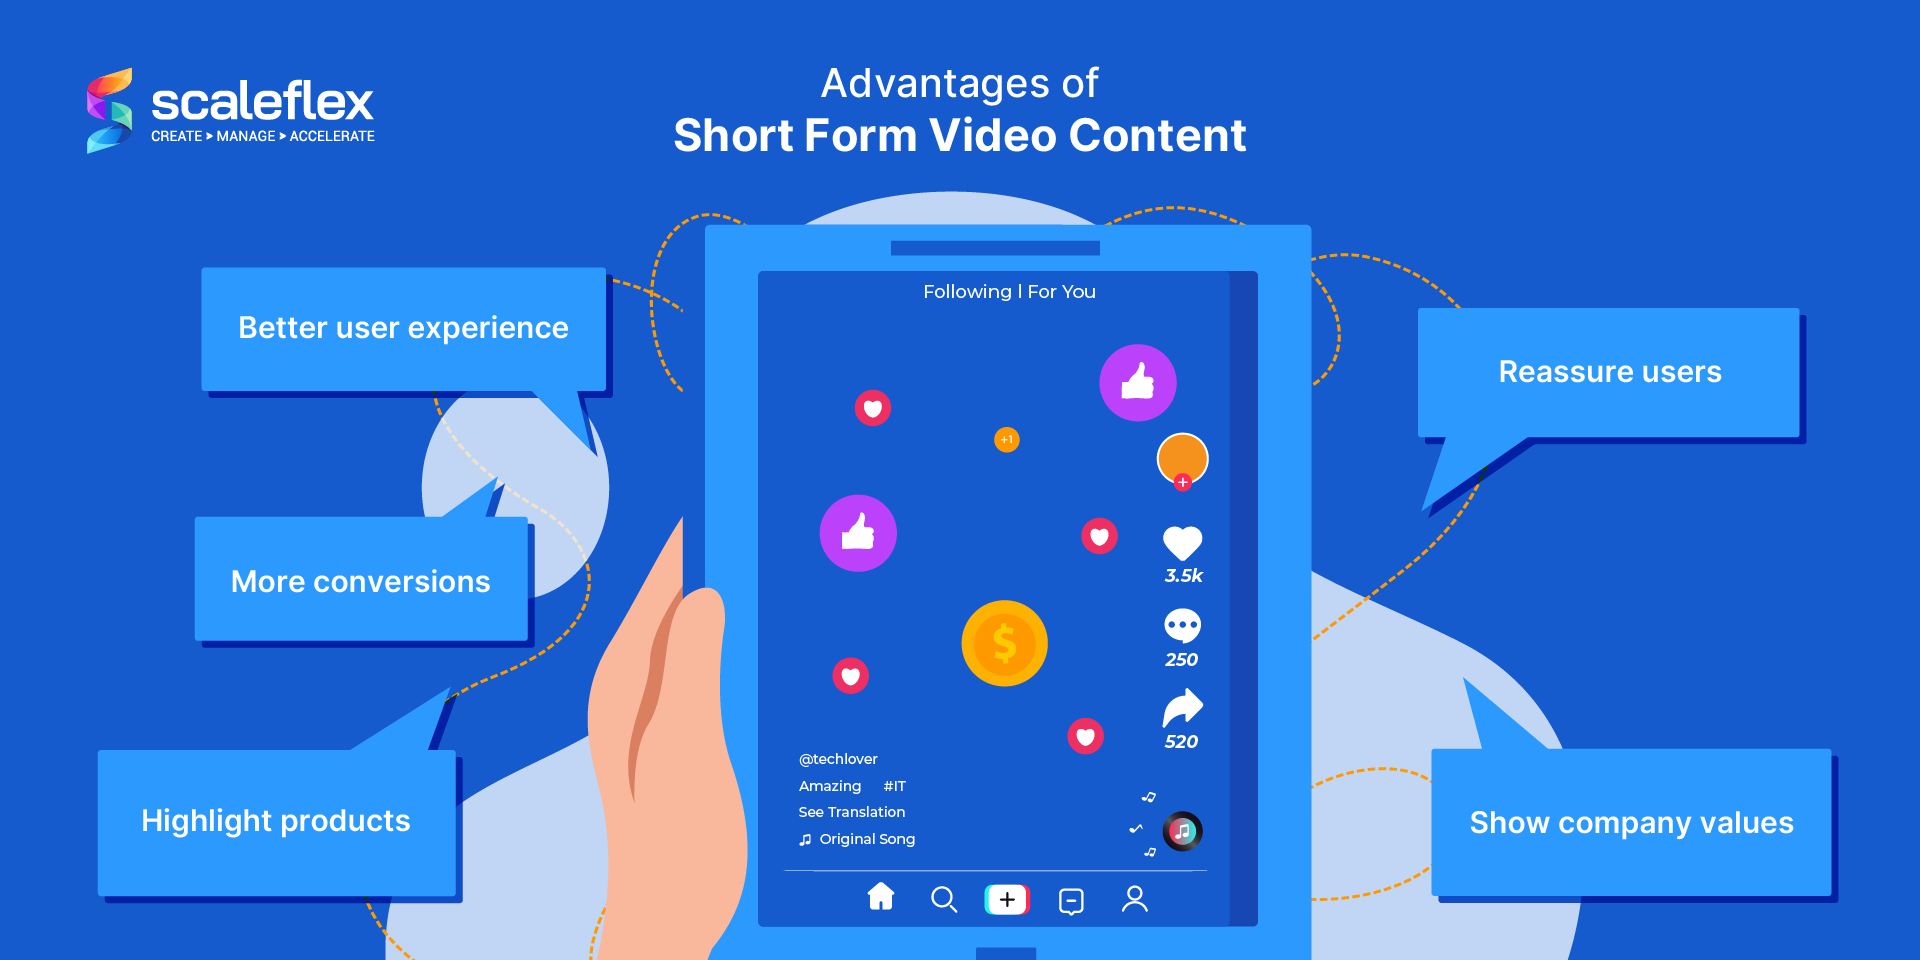 Short form video content can be efficiently displayed on any device, and its advantages are numerous and considerable.